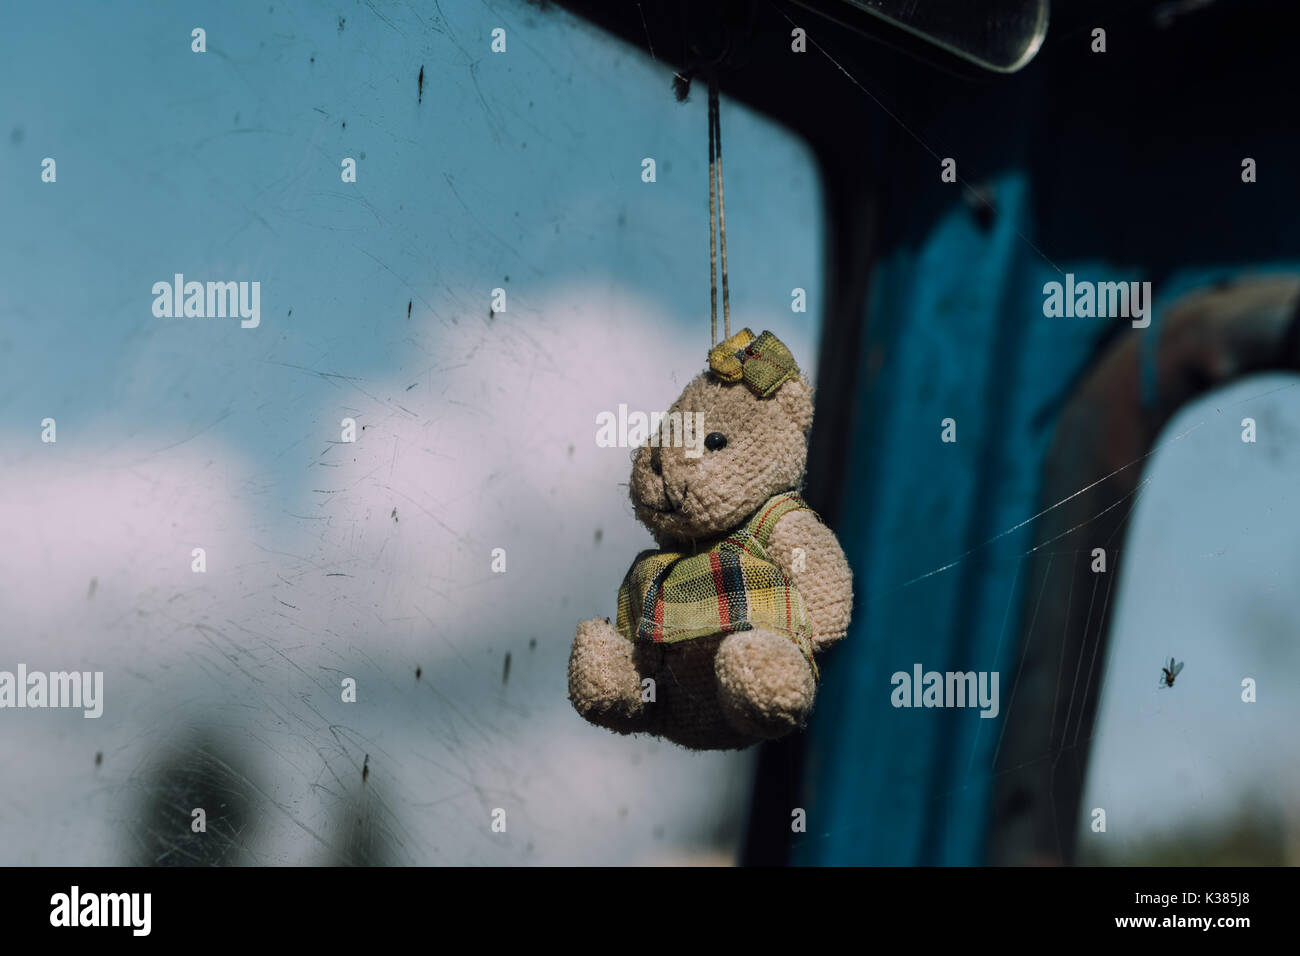 Old dusty toy hanging in the car. Stock Photo